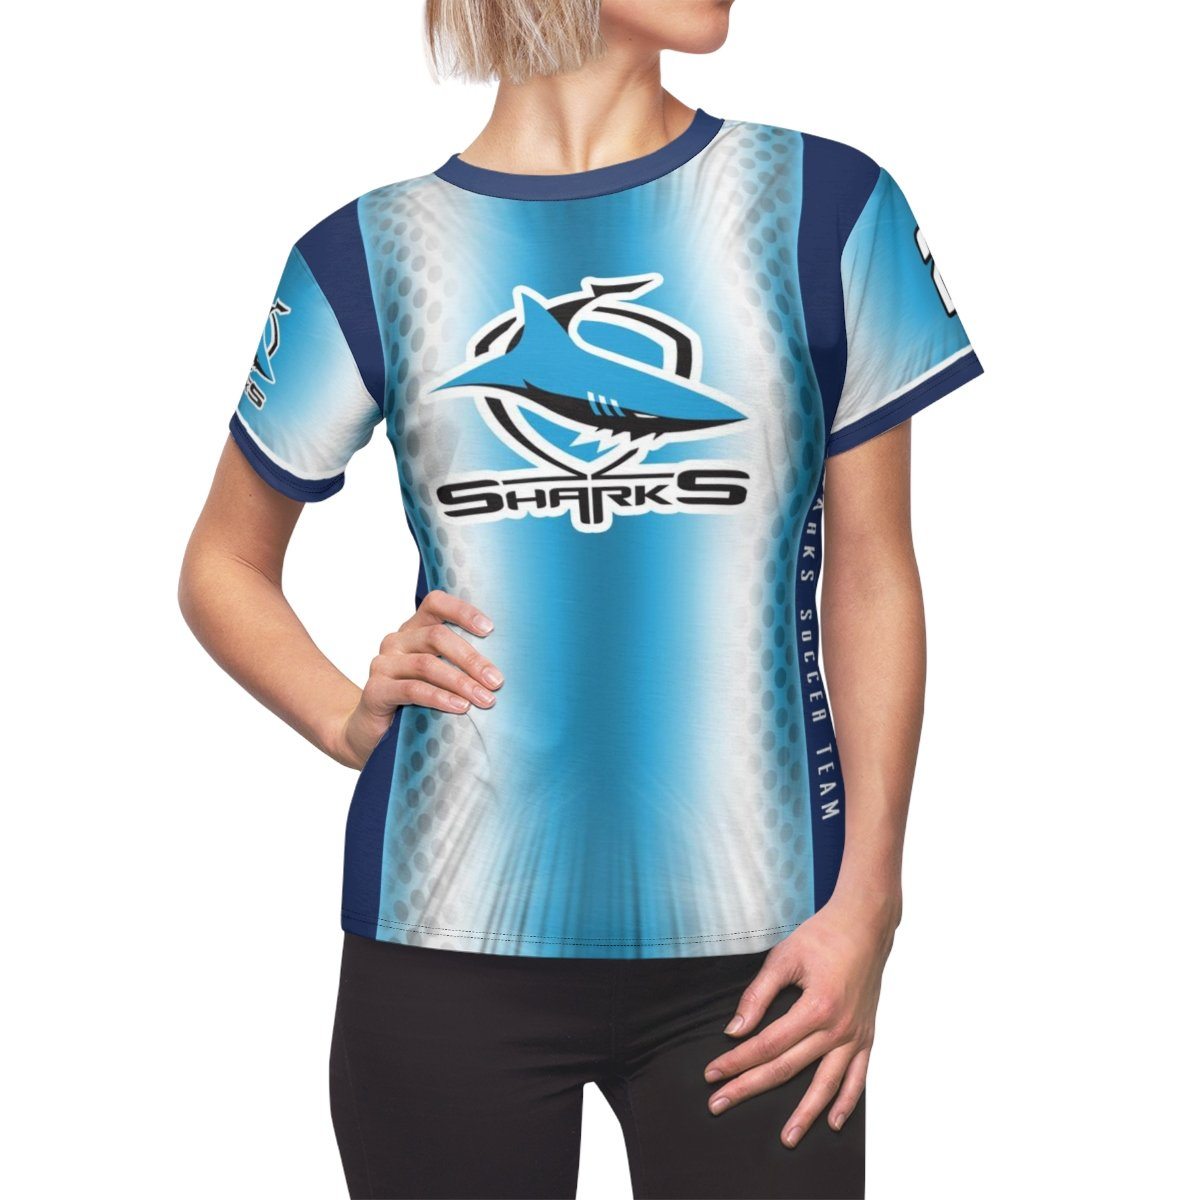 Superstar - V.1 - Extreme Sportswear Women's Cut & Sew Template-Photoshop Template - Photo Solutions